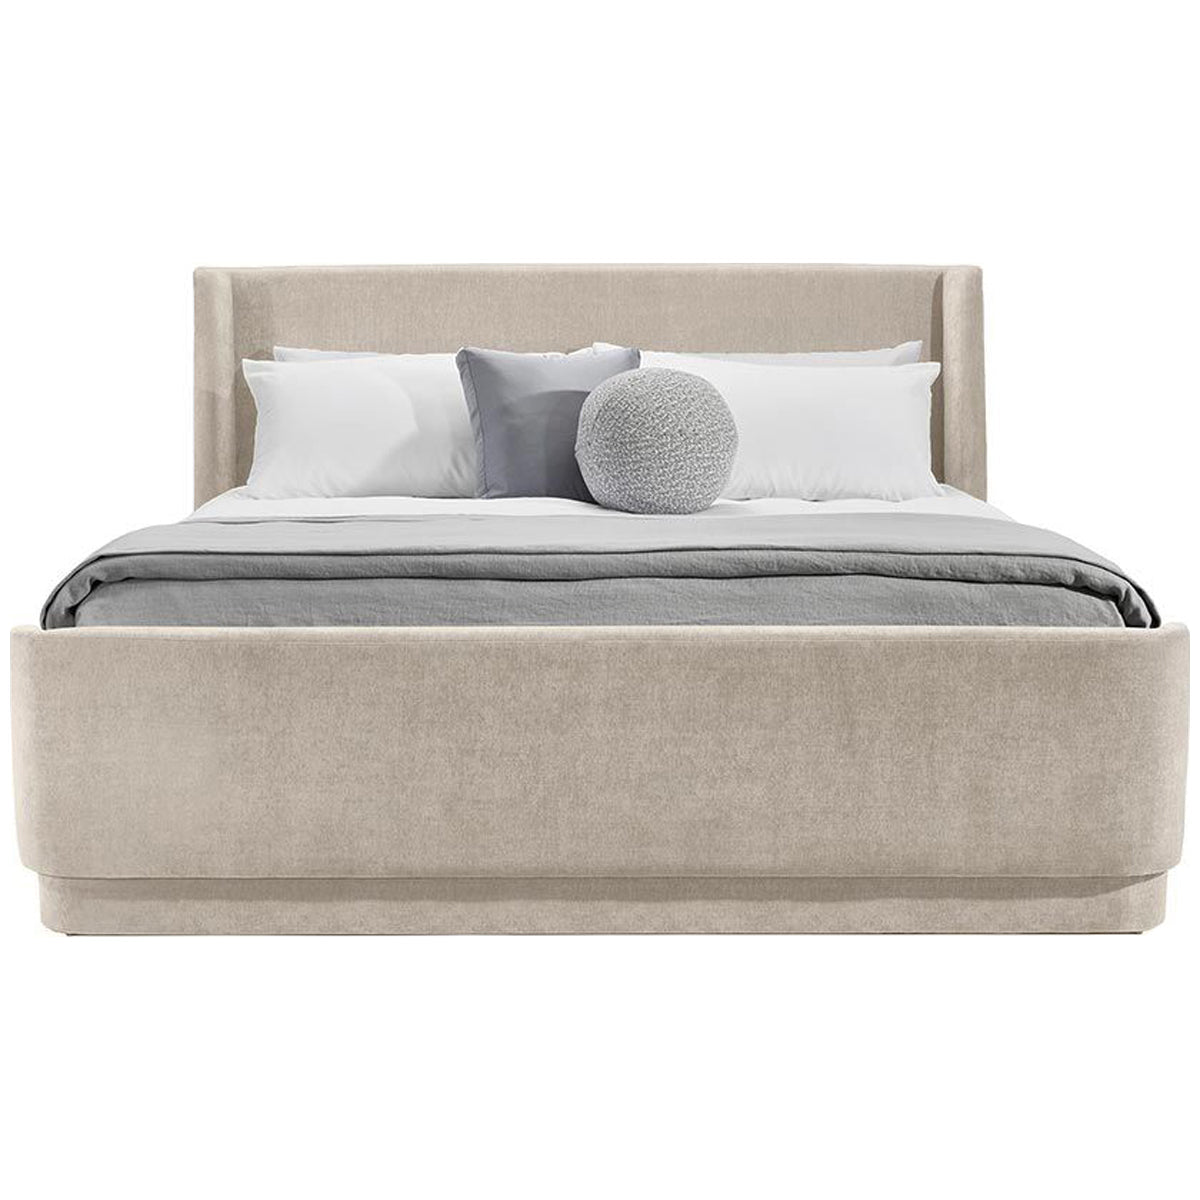 Interlude Home Kaia Textured Chenille Bed